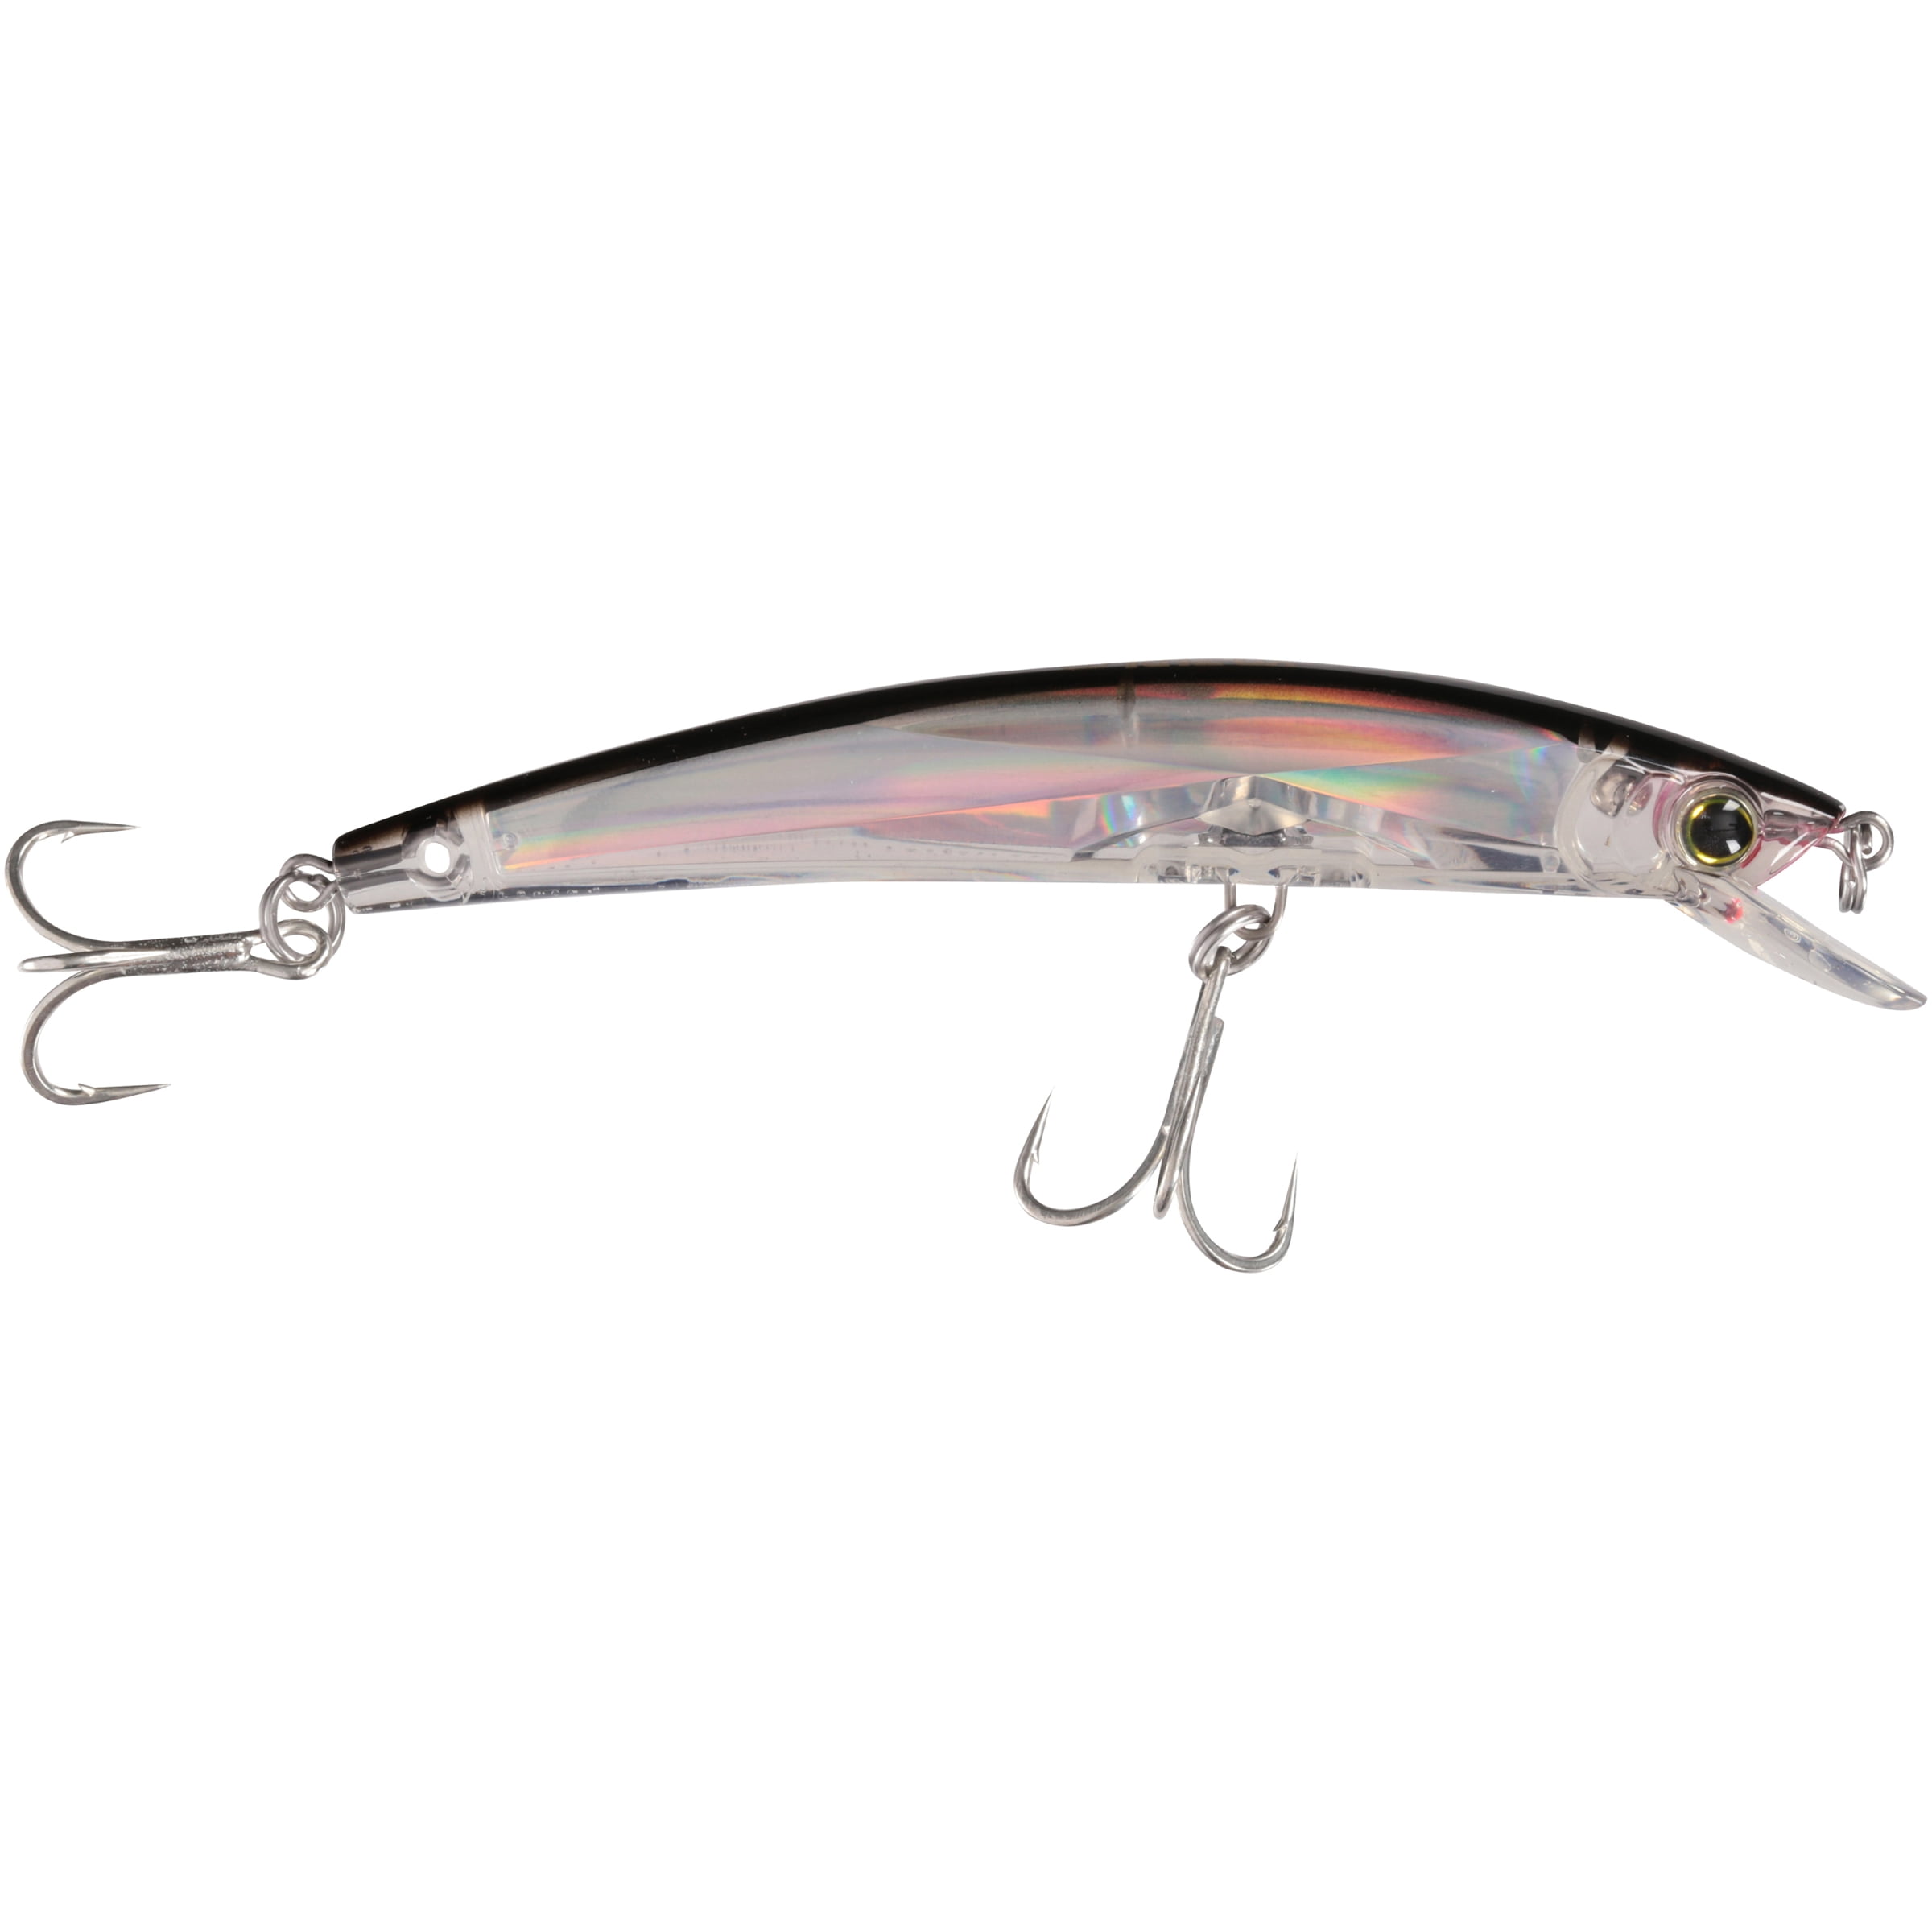 Dancing Minnow Fishing Lure-Fast Shipping A0R6 